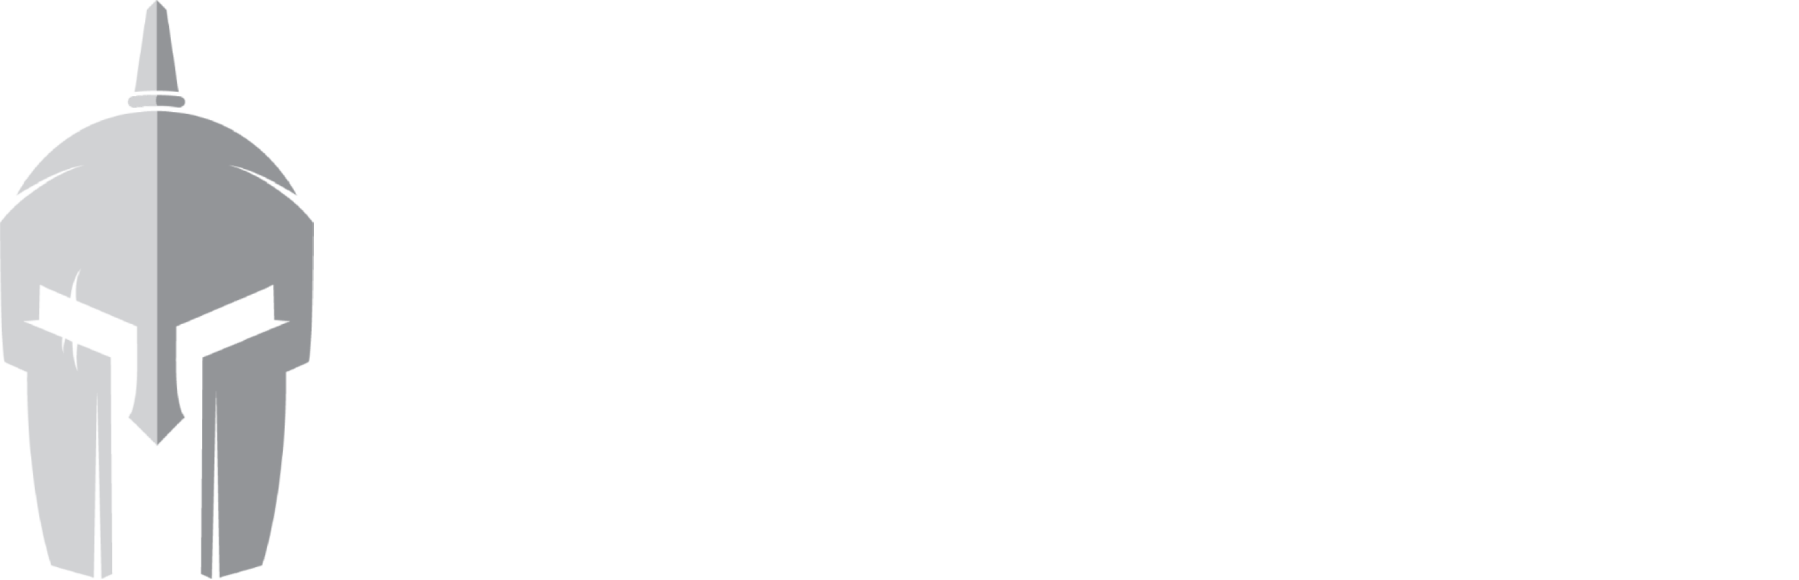 Spartan Projects